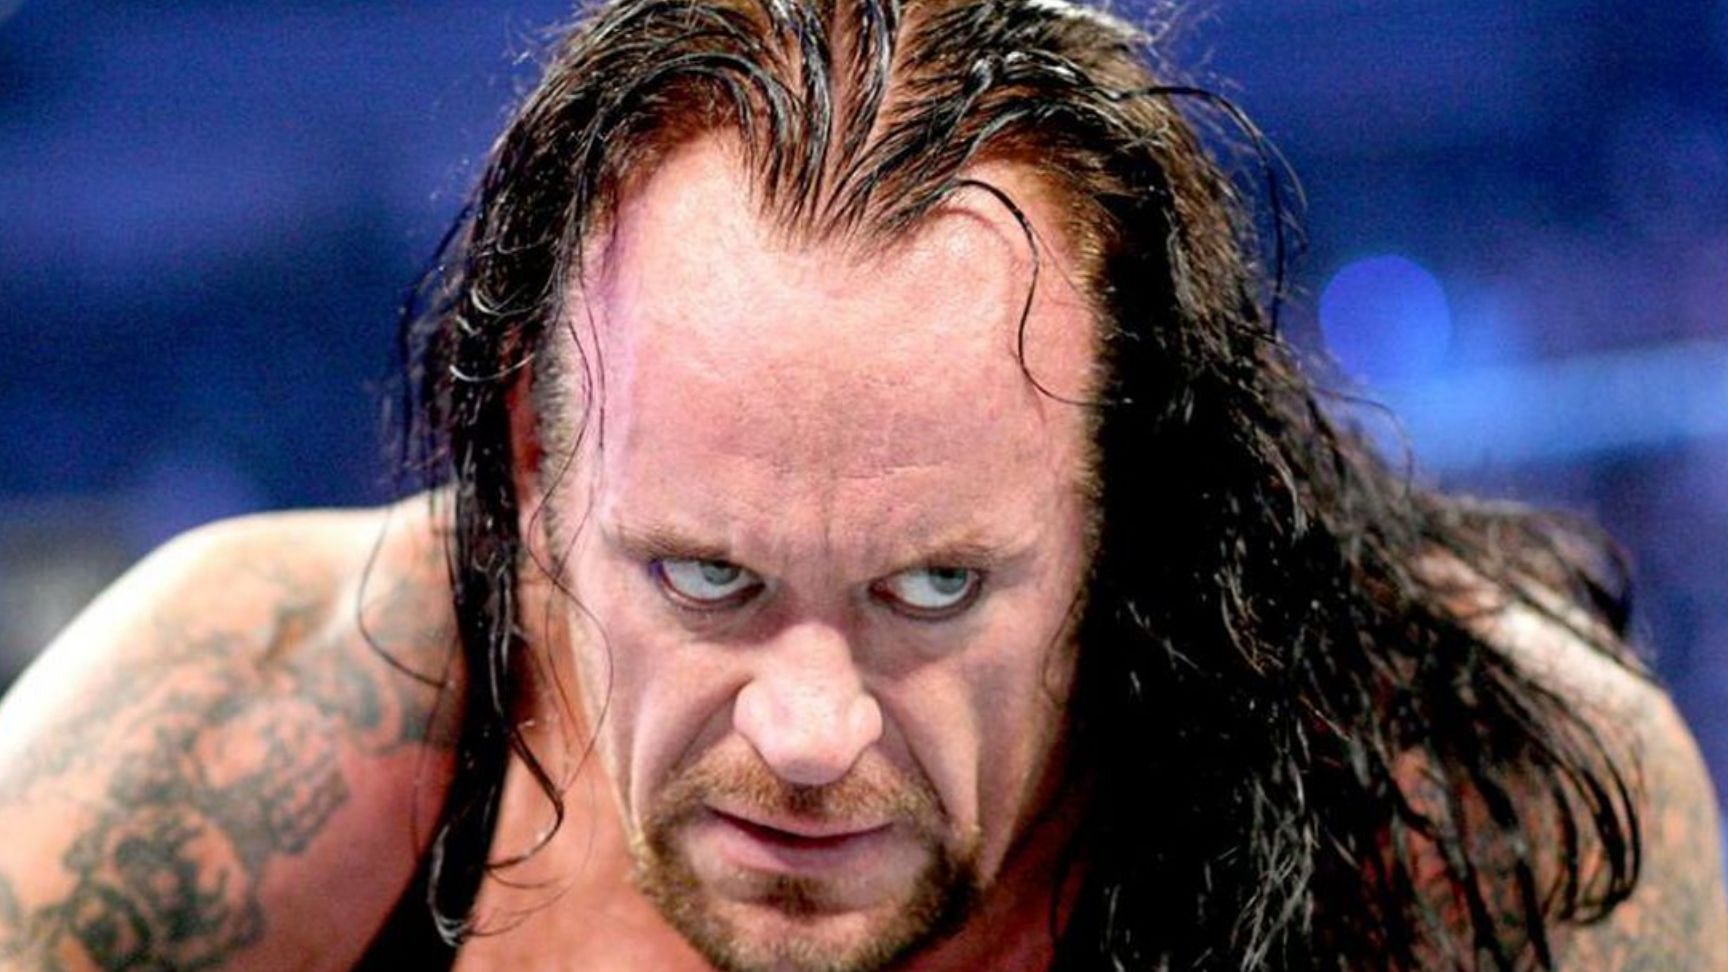 The Undertaker was inducted into the WWE Hall Of Fame in April 2022.